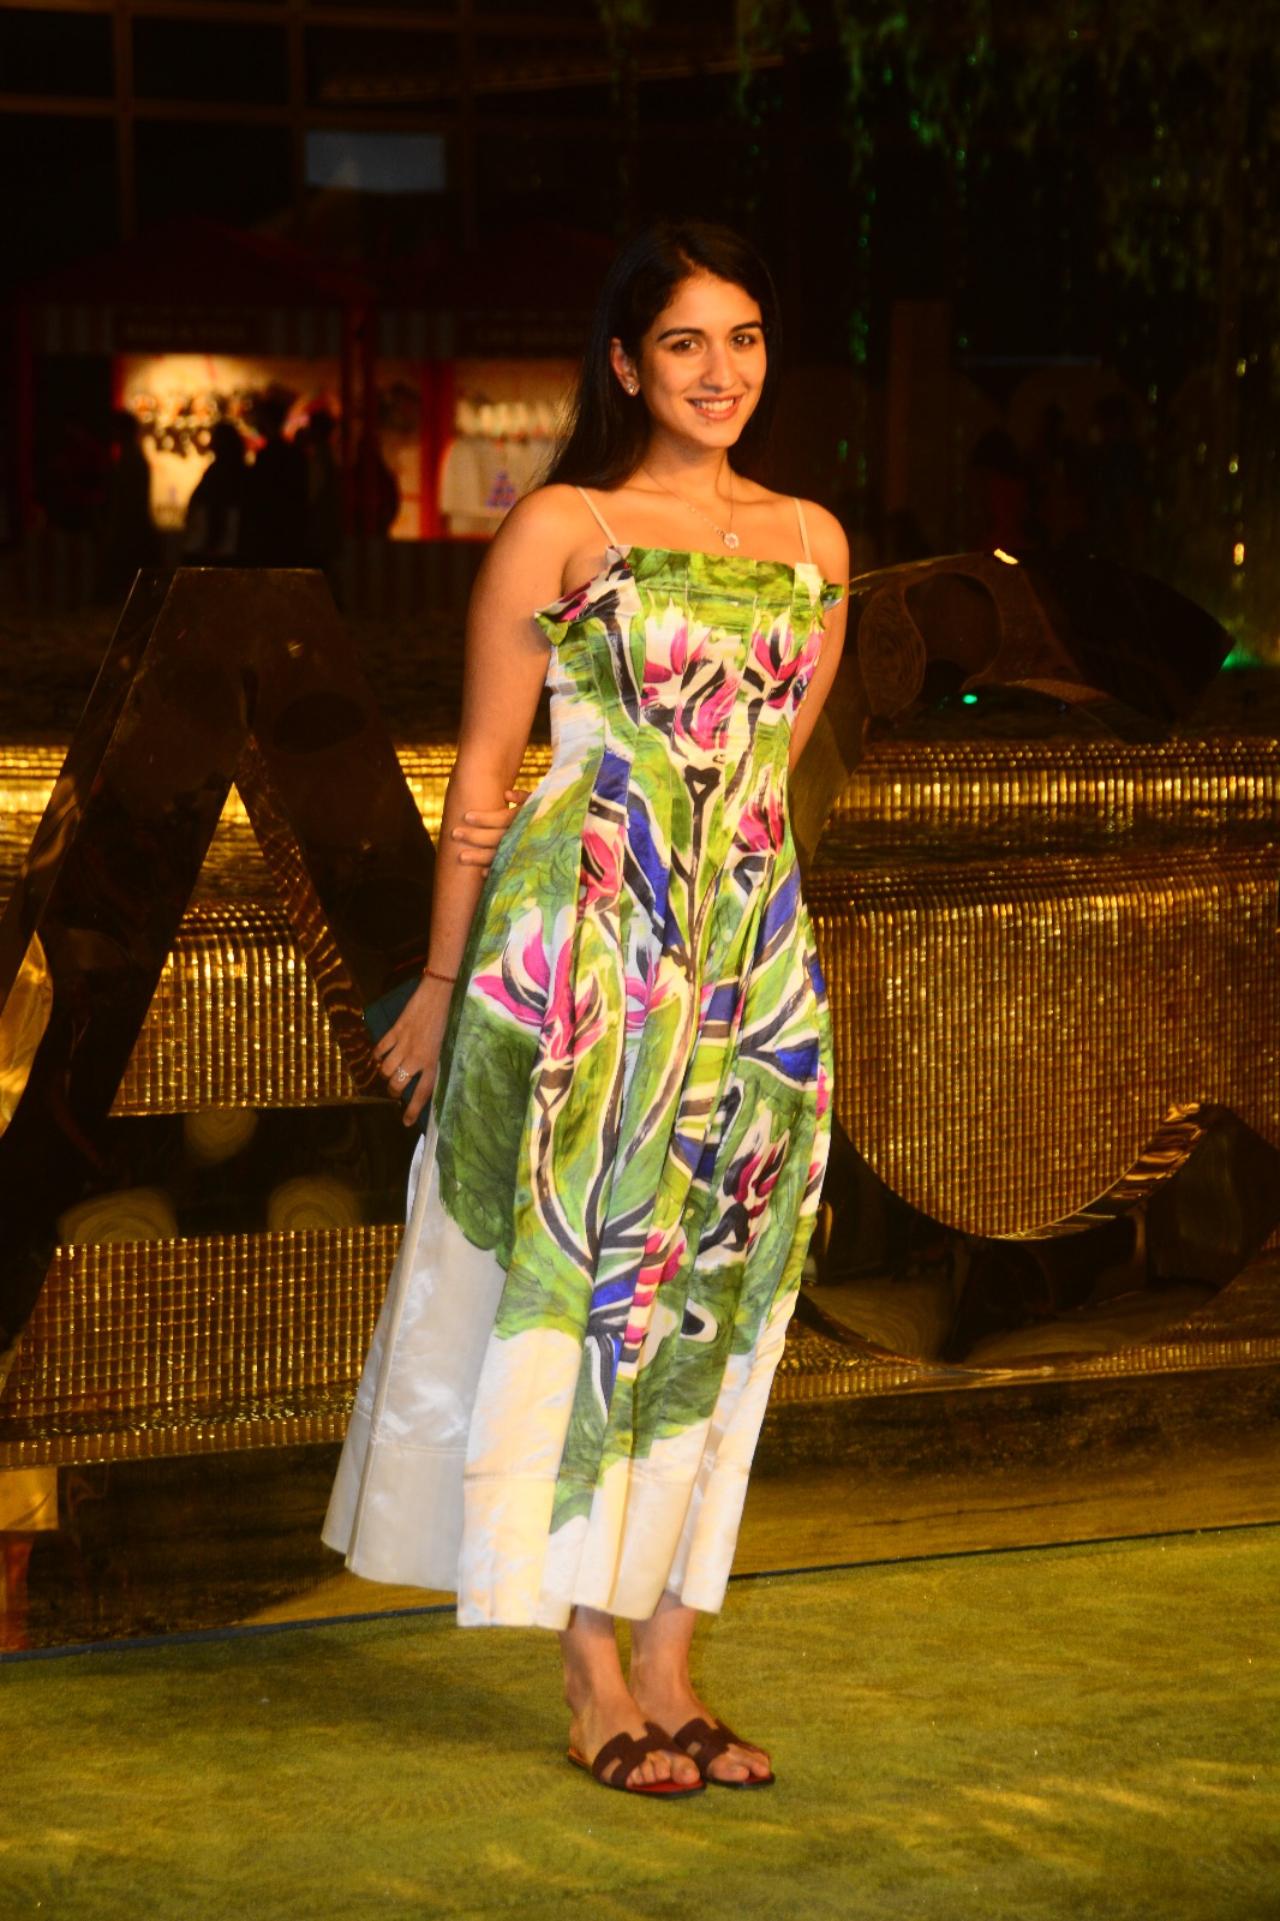 Radhika Merchant, who is engaged to Ambani's youngest son Anand, looked pretty in a floral pretted sundress